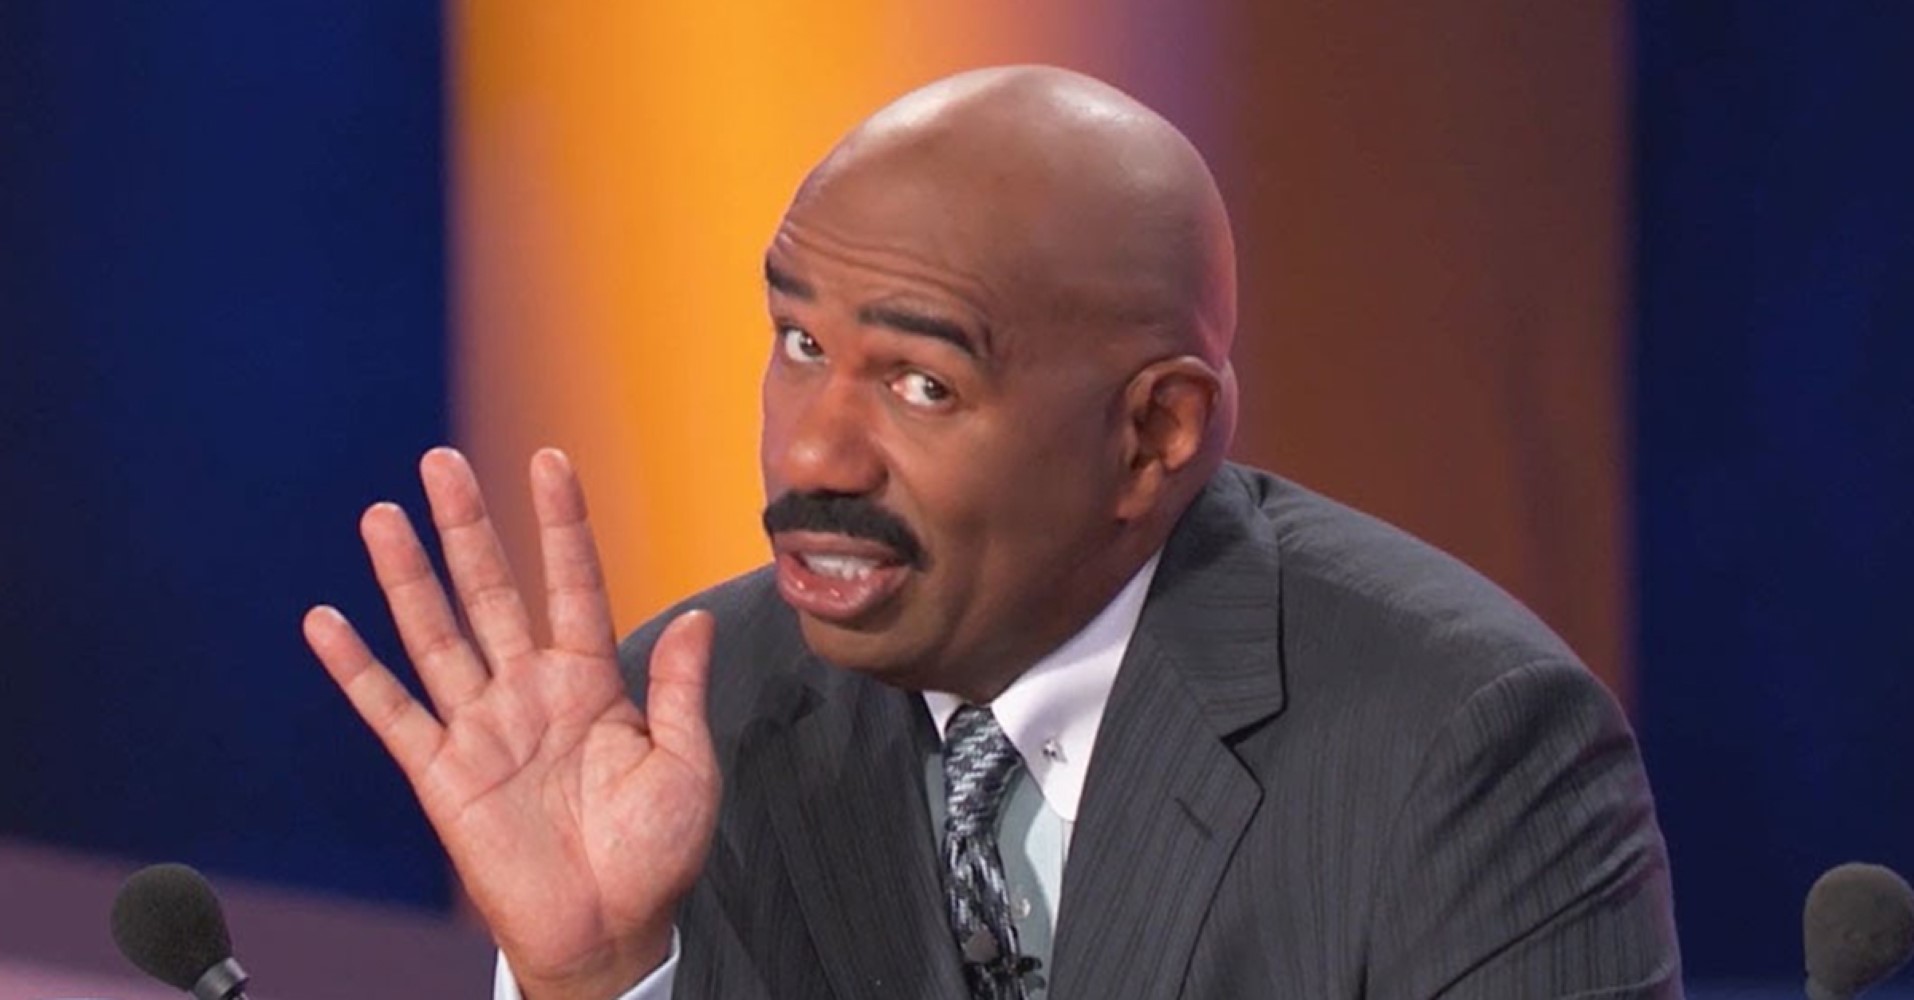 10 Times Steve Harvey’s Soul Collapsed On “Family Feud”